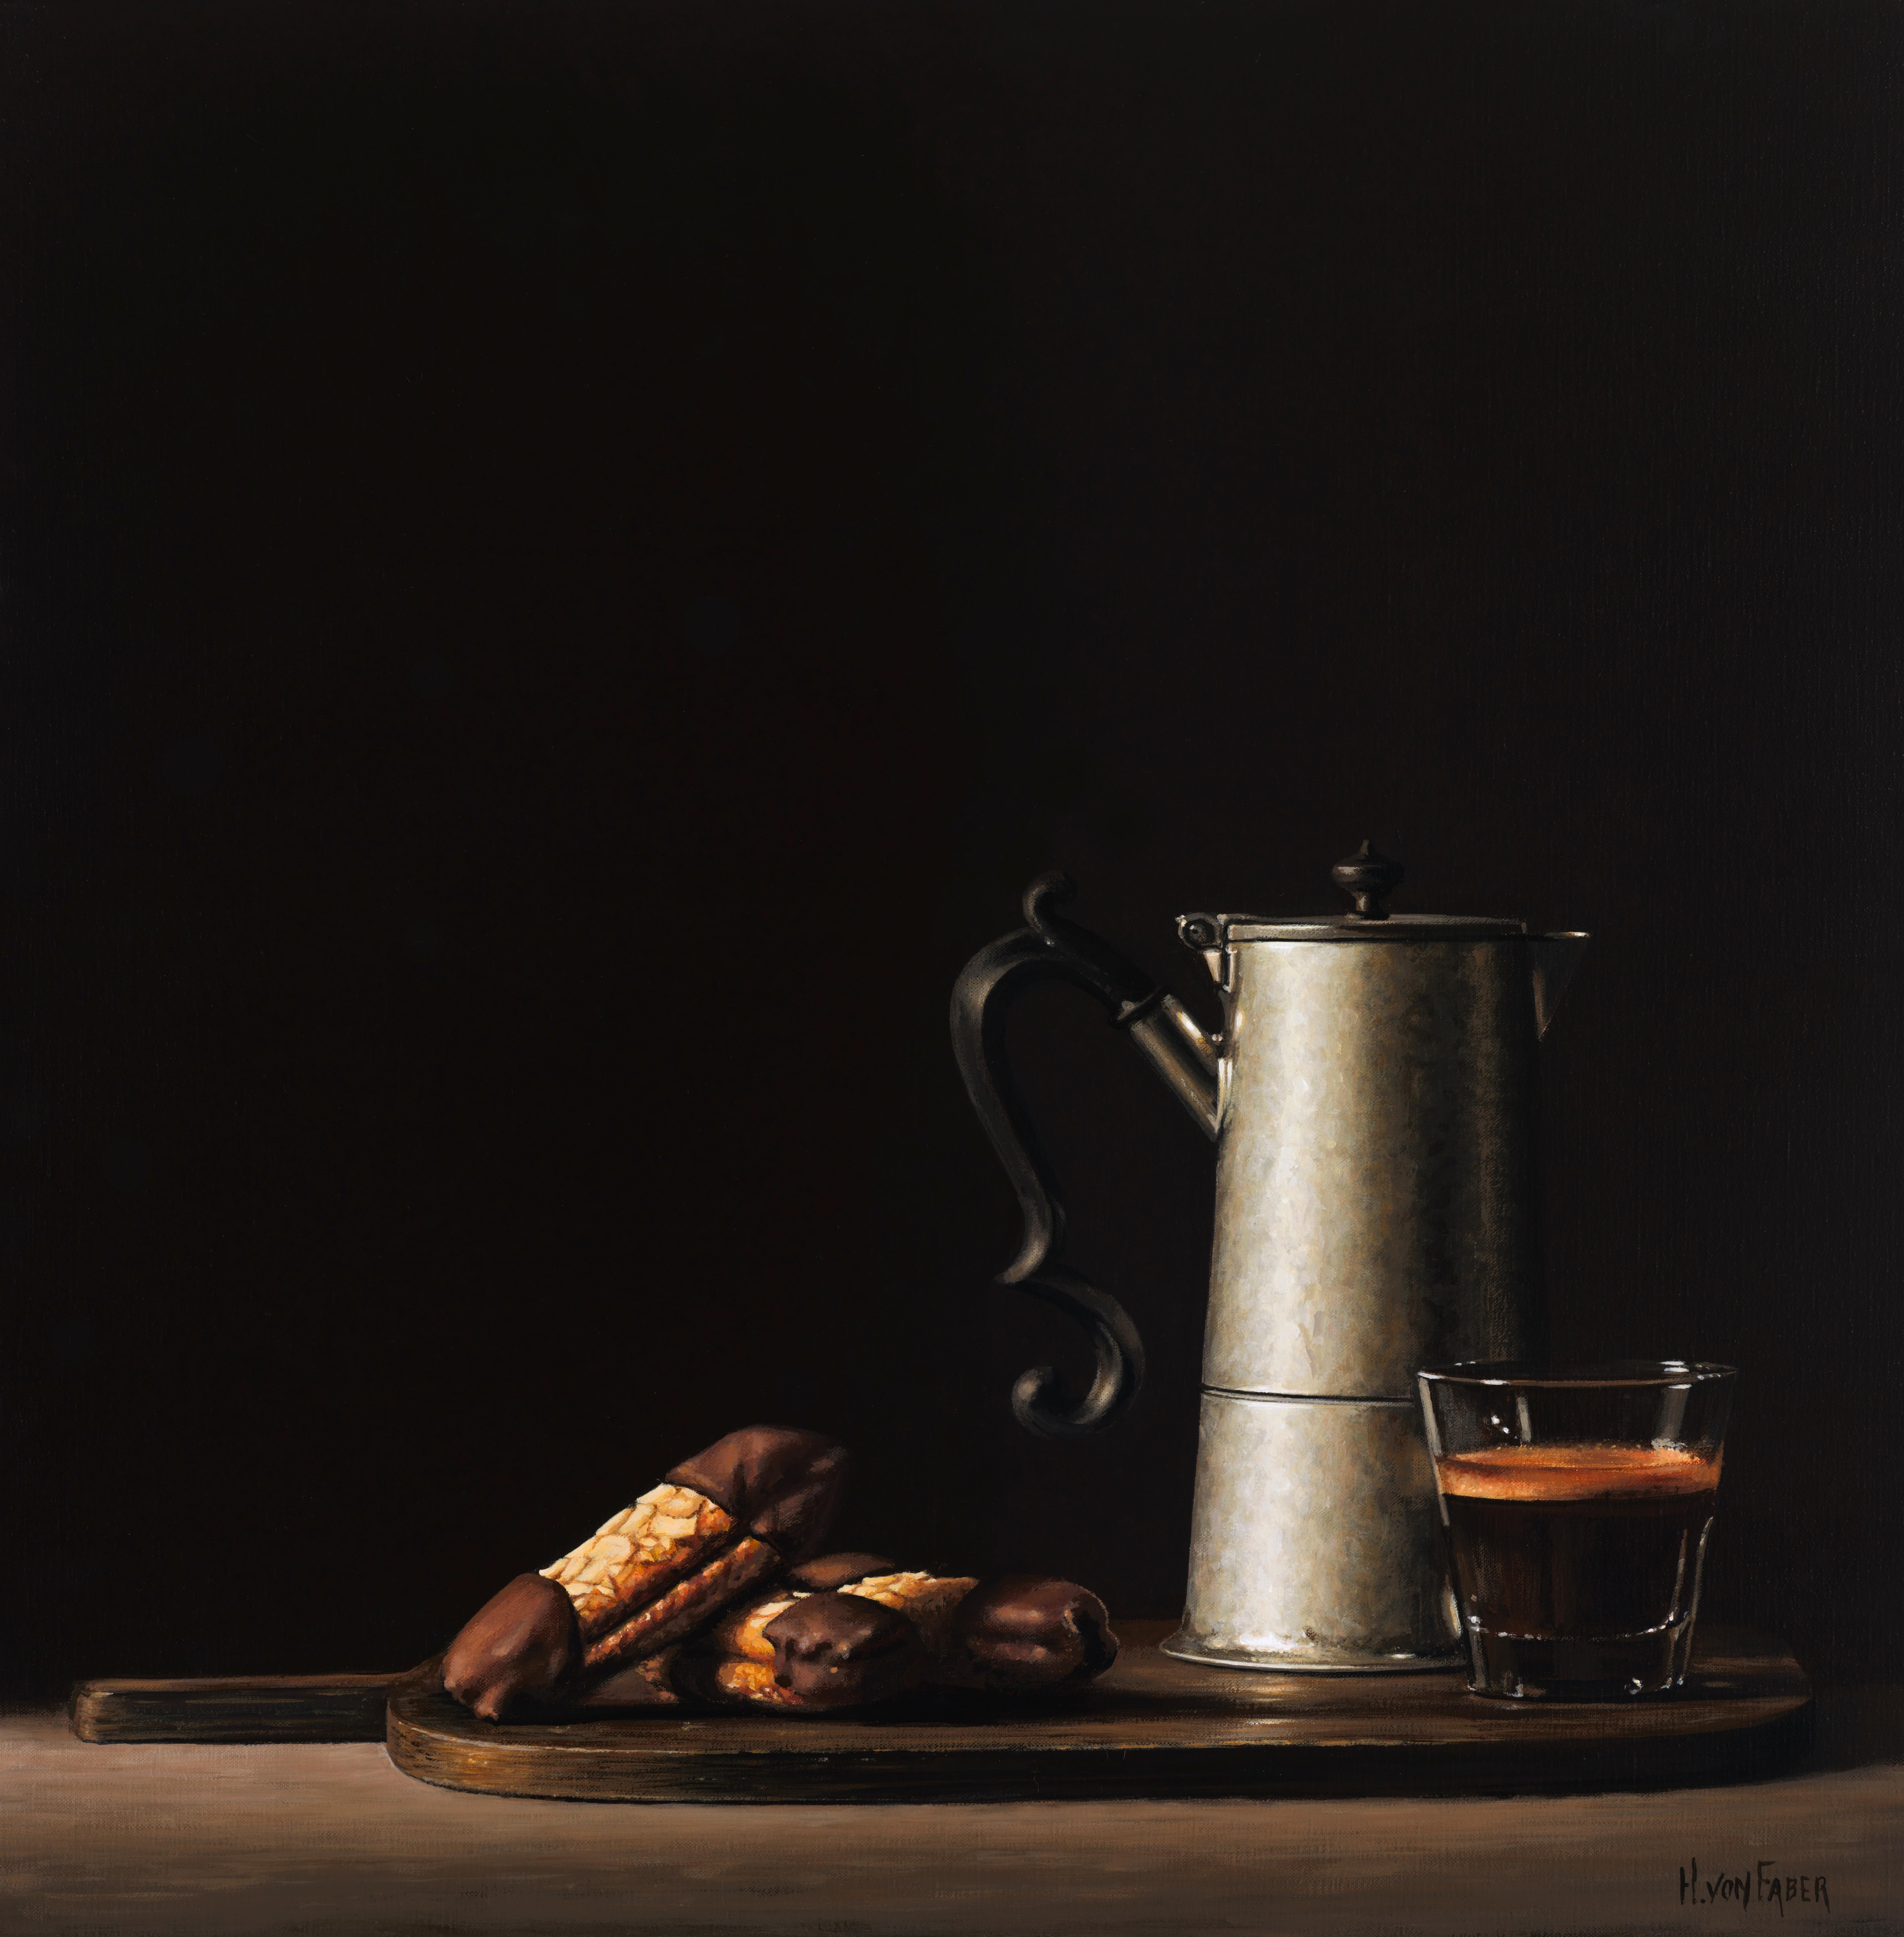 Heidi von Faber Figurative Painting - Chocolate Cookies with Coffee - 21st Contemporary Realistic Still-life painting